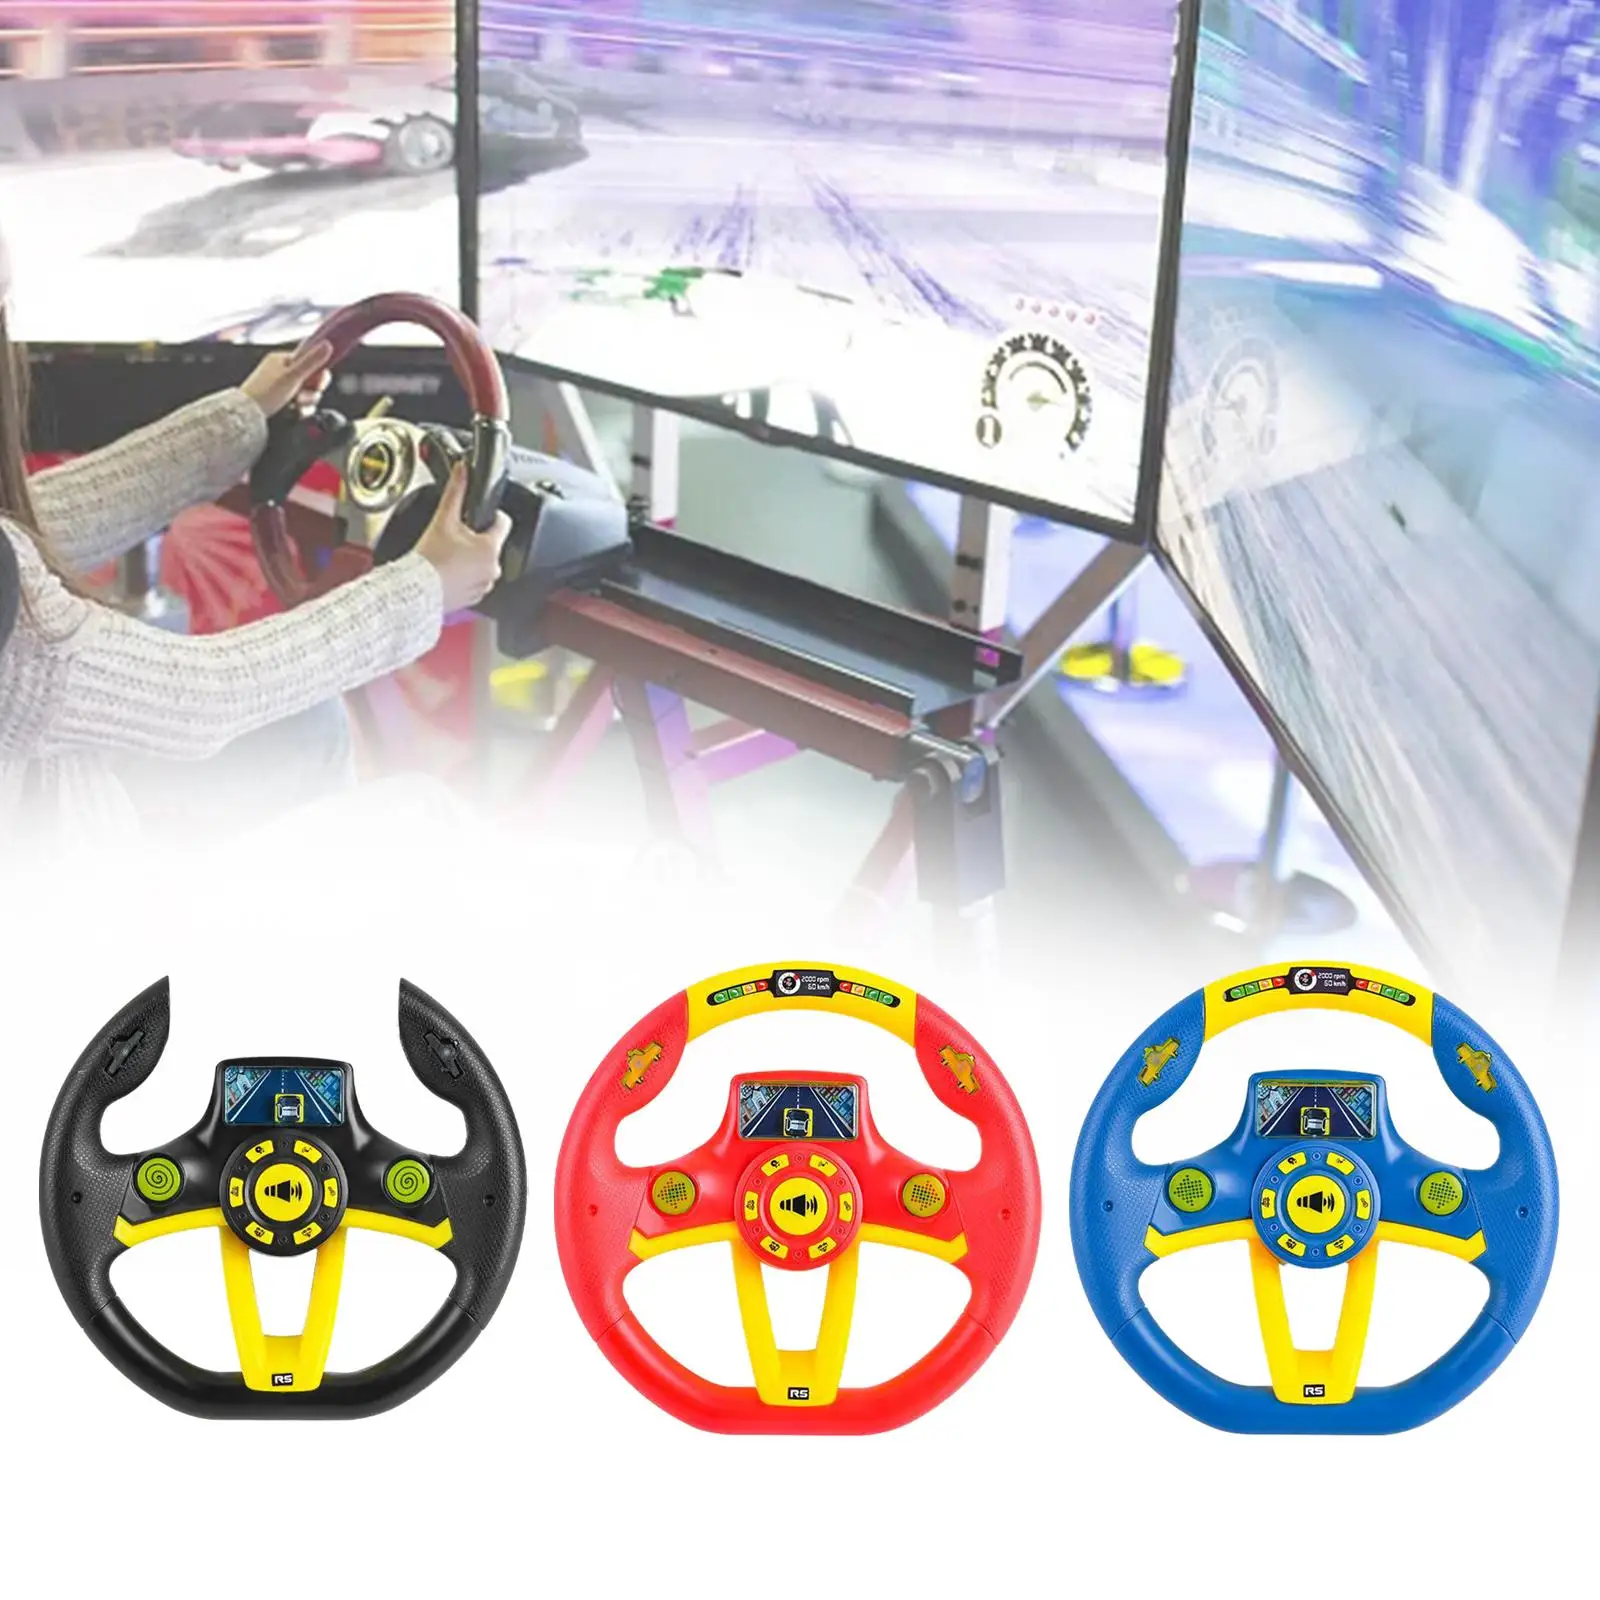 Simulated Steering Wheel Driving Busy Board DIY Accessory for Playground Climbing Frame Amusement Park Outdoor Birthday Gifts